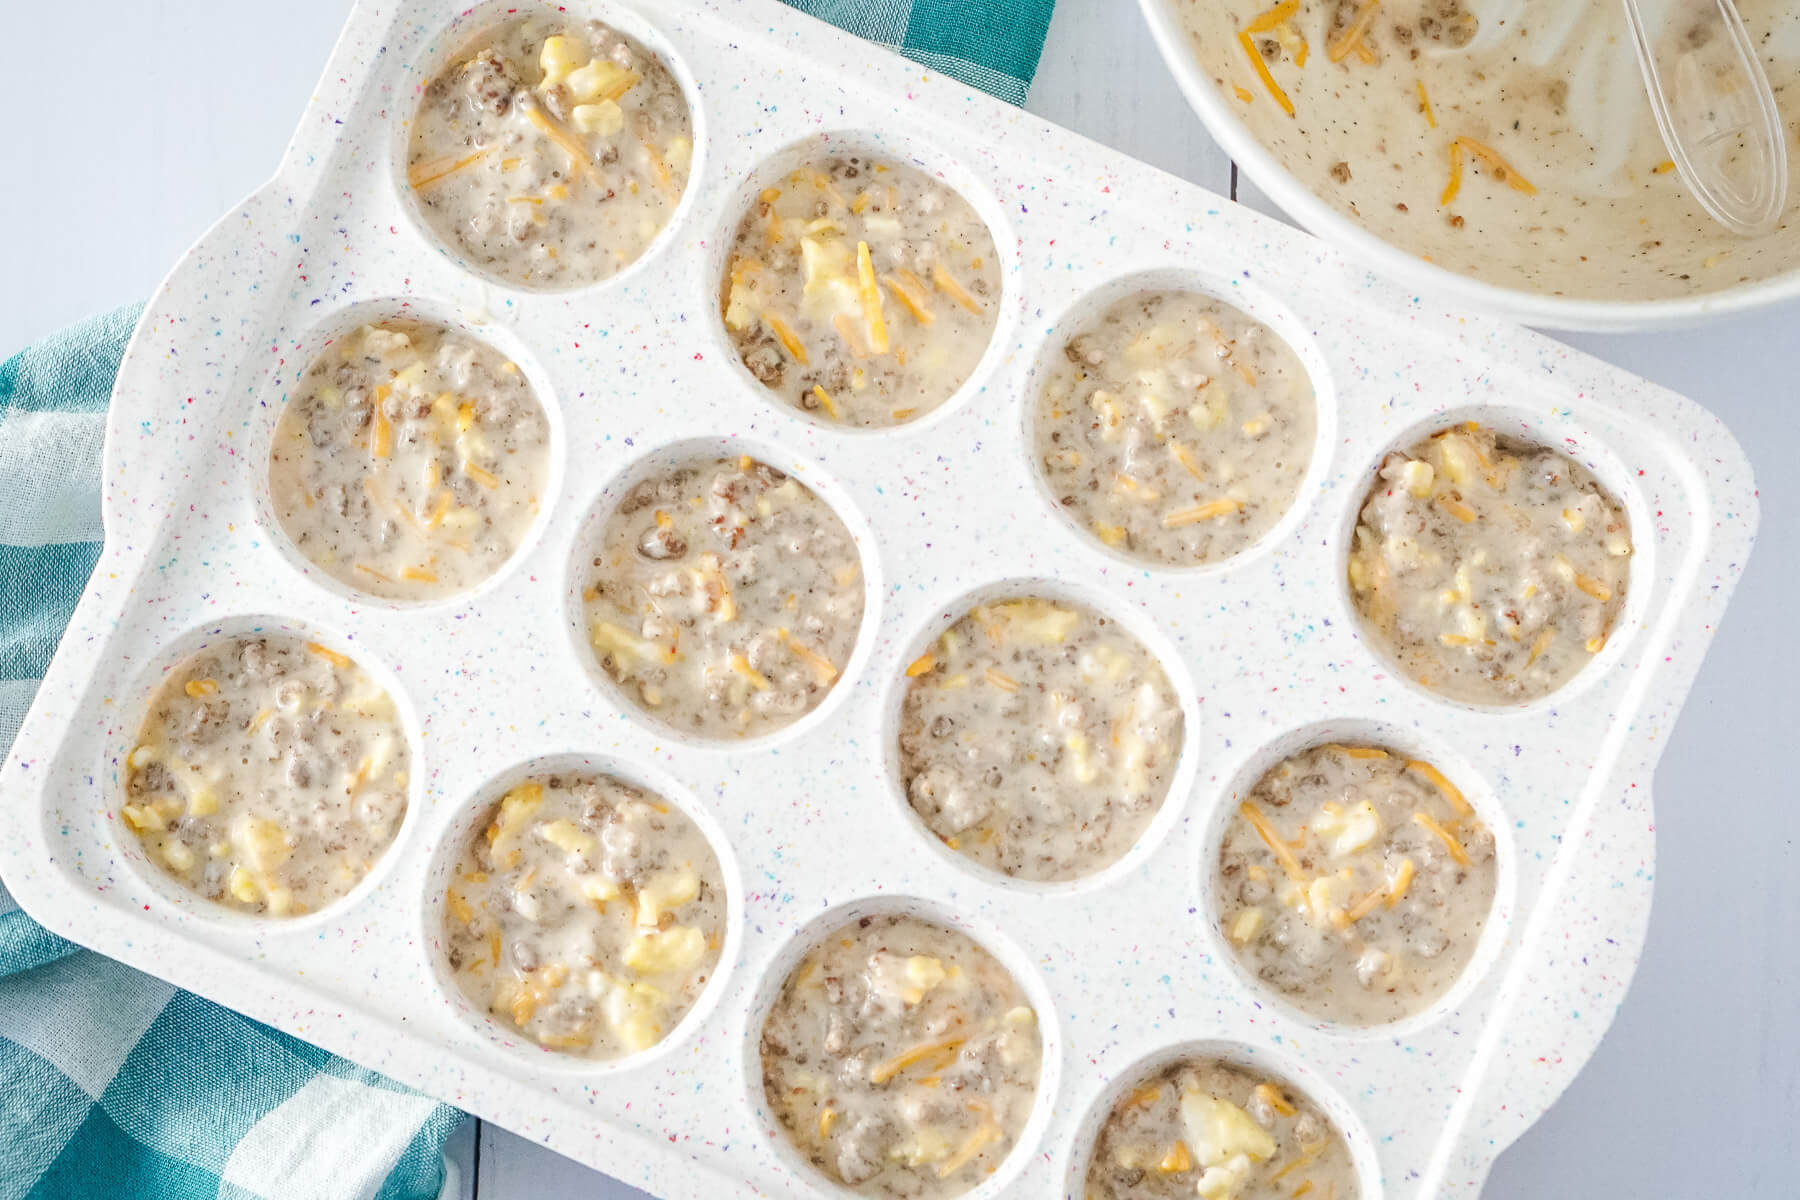 The muffin mixture is added to the greased muffin tin.